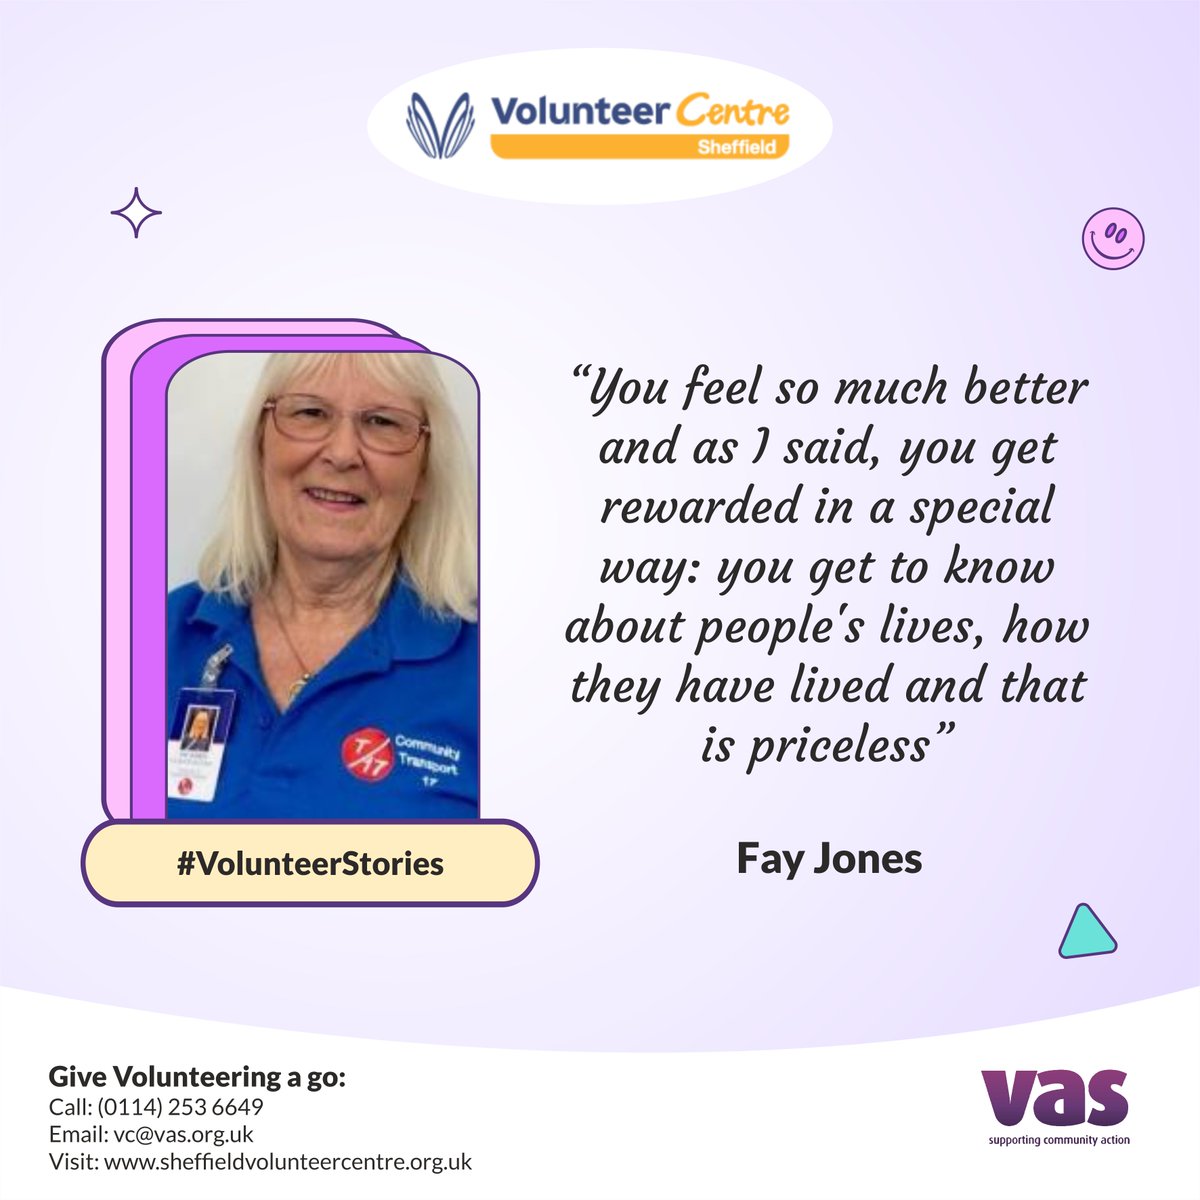 Fay volunteers with @transport17ltd - she shares her inspiring story here: bit.ly/49DHYLx Want to give volunteering a go? Check out 200+ opportunities in #Sheffield: sheffieldvolunteercentre.org.uk or call us on (0114) 253 6649 (Mon-Weds) 🙂